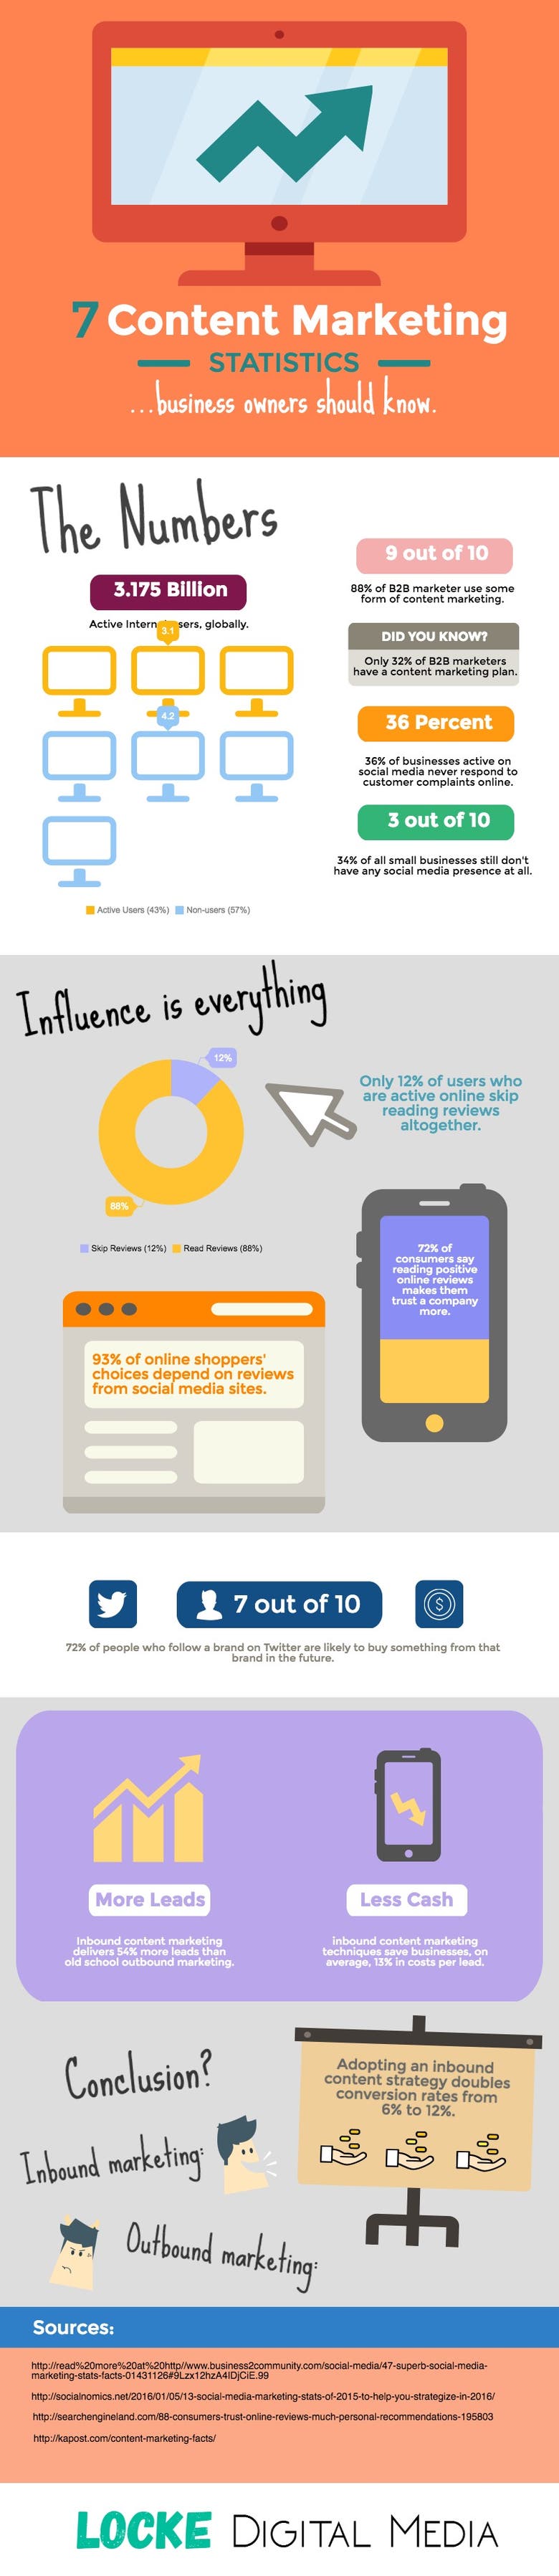 Content Marketing Statistics Infographic for Business Blog